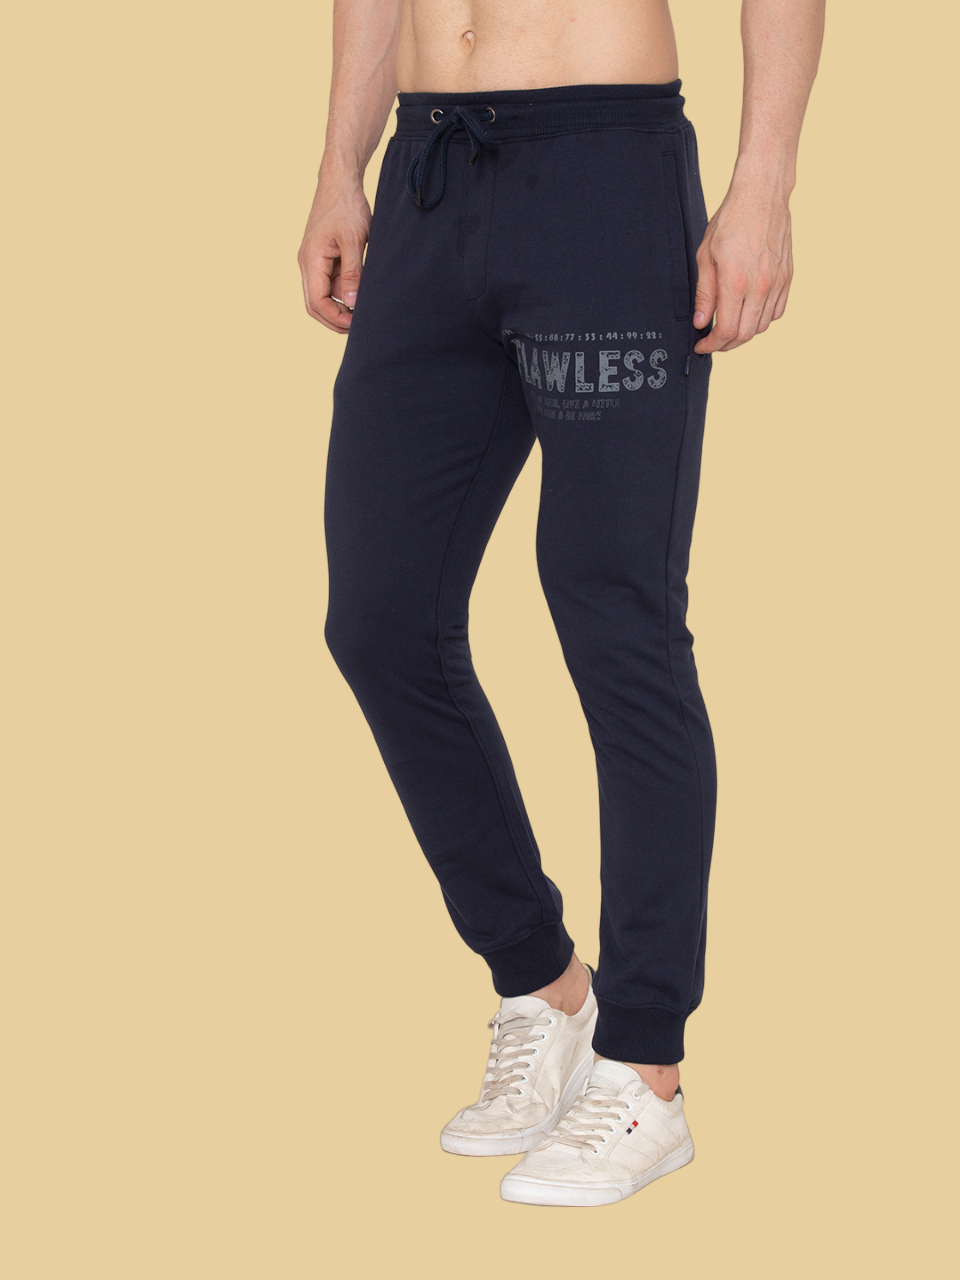 Flawless Comfort and Style Trendy Jogger for Men Being Flawless